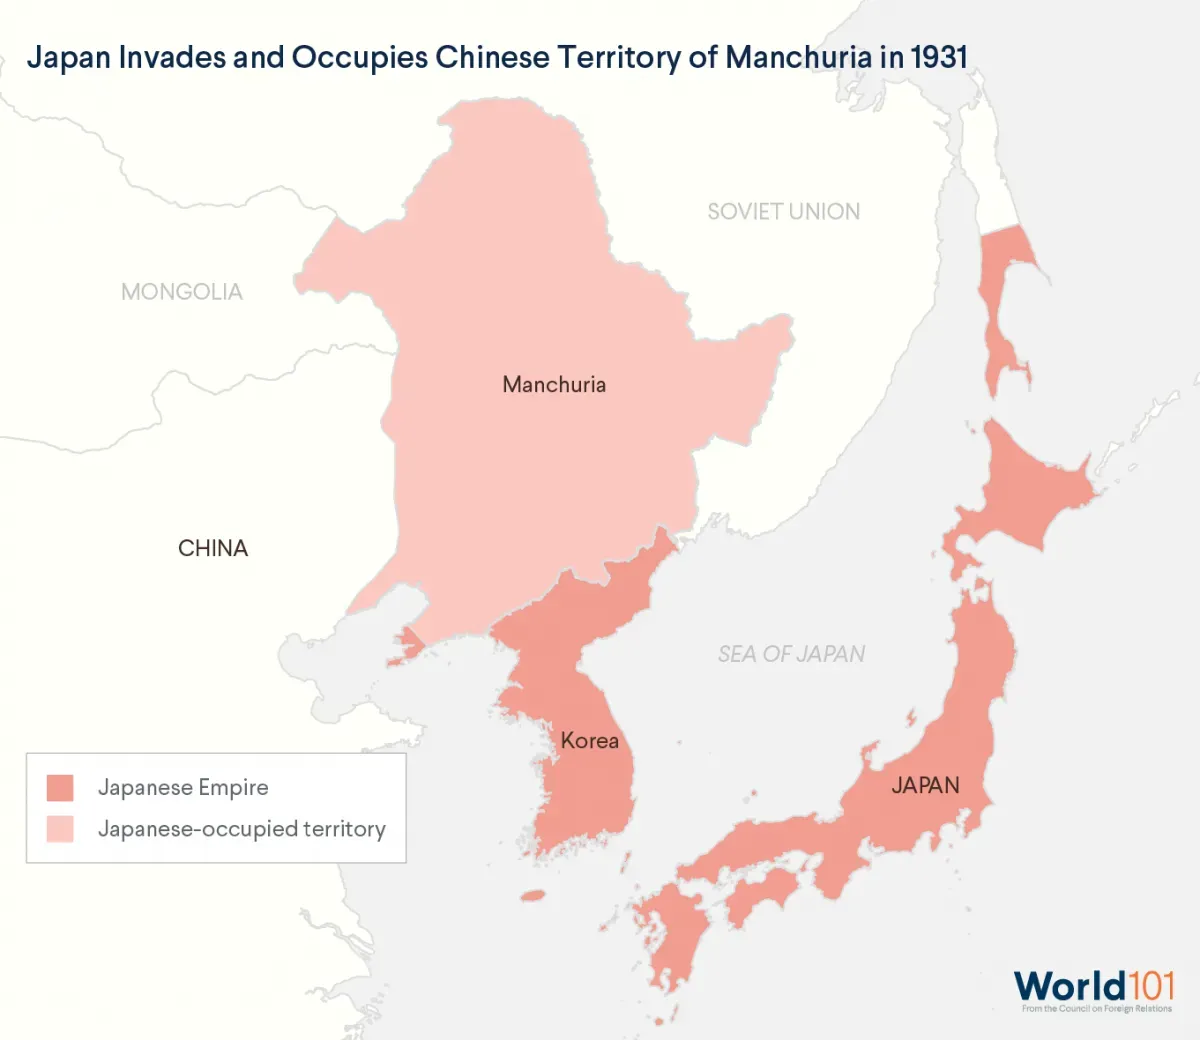 Map of the Japanese Empire and the Chinese territory Manchuria it occupied in 1931.